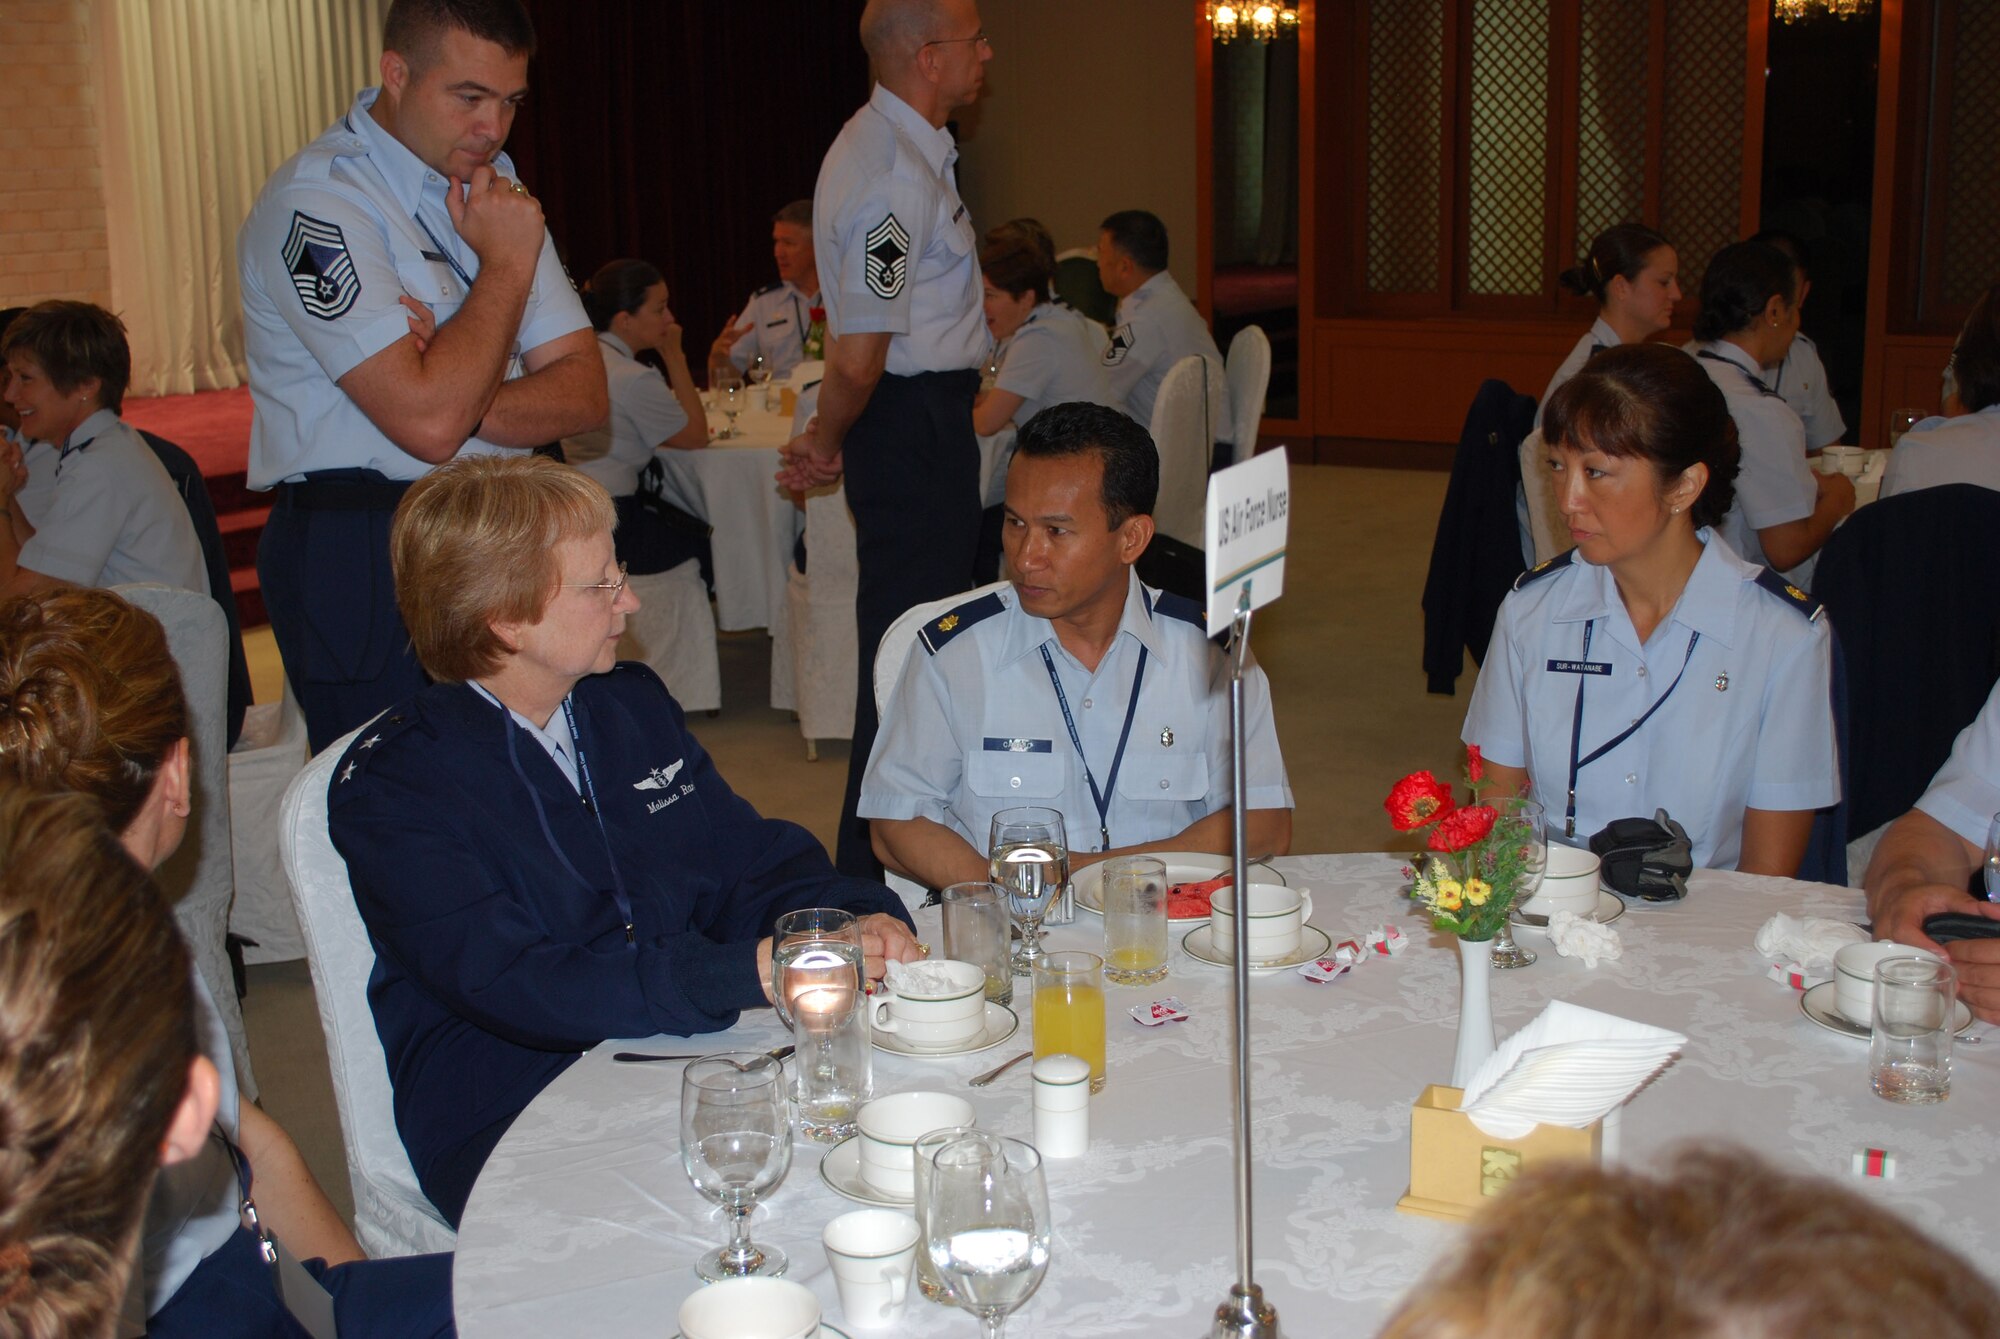 Maj. Gen. Melissa Rank, Assistant U.S. Air Force Surgeon General, Medical Force Develoment, discusses professional issues with Maj. Edilbert Castro and Maj. Jennifer Sur-Watanabe, Air Force Reserve 624th Aeromedical Staging Squadron, at the second annual Asia Pacific Military Conference. Majors Castro and Sur-Watanabe were two of more than 40 Air Force, Army and Navy nurses and medical professionals who attended the conference with attendees from seven countries Sept. 1-5 at the Korea Armed Forces Nursing Academy in Daejeon, Republic of Korea. The 624th ASTS is part of the 624th Regional Support Group, Hickam Air Force Base, Hawaii.